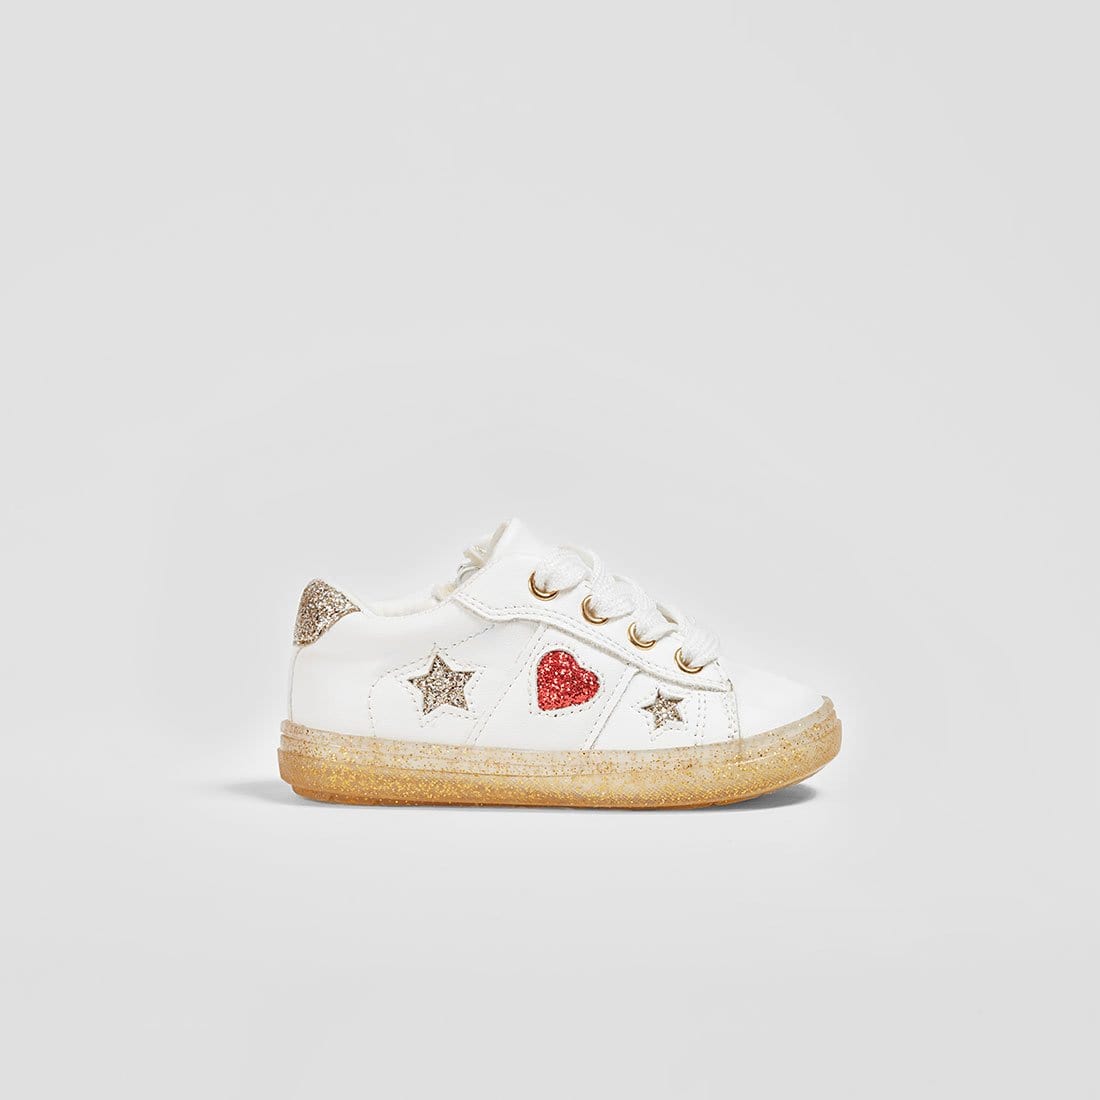 OSITO Shoes Baby's "Heart and Stars" White Sneakers